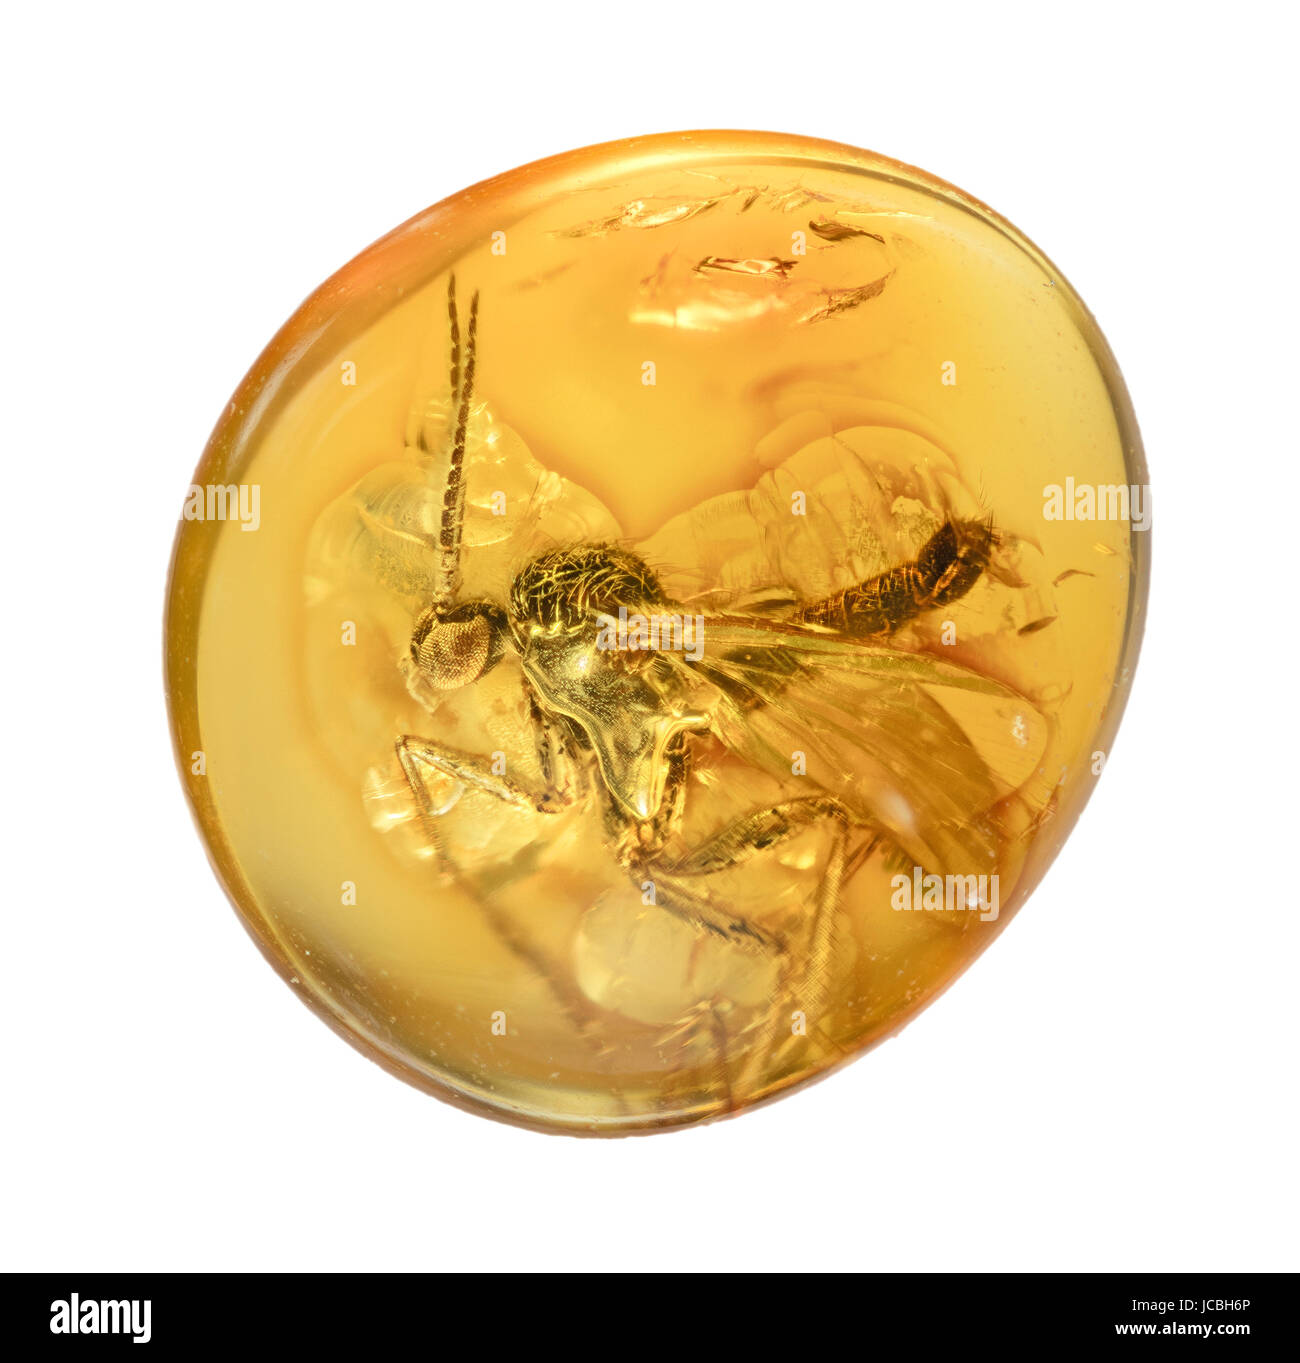 Fossilised fly in amber resin, hard, translucent originating from extinct coniferous trees of the Tertiary period of the fossil record Stock Photo